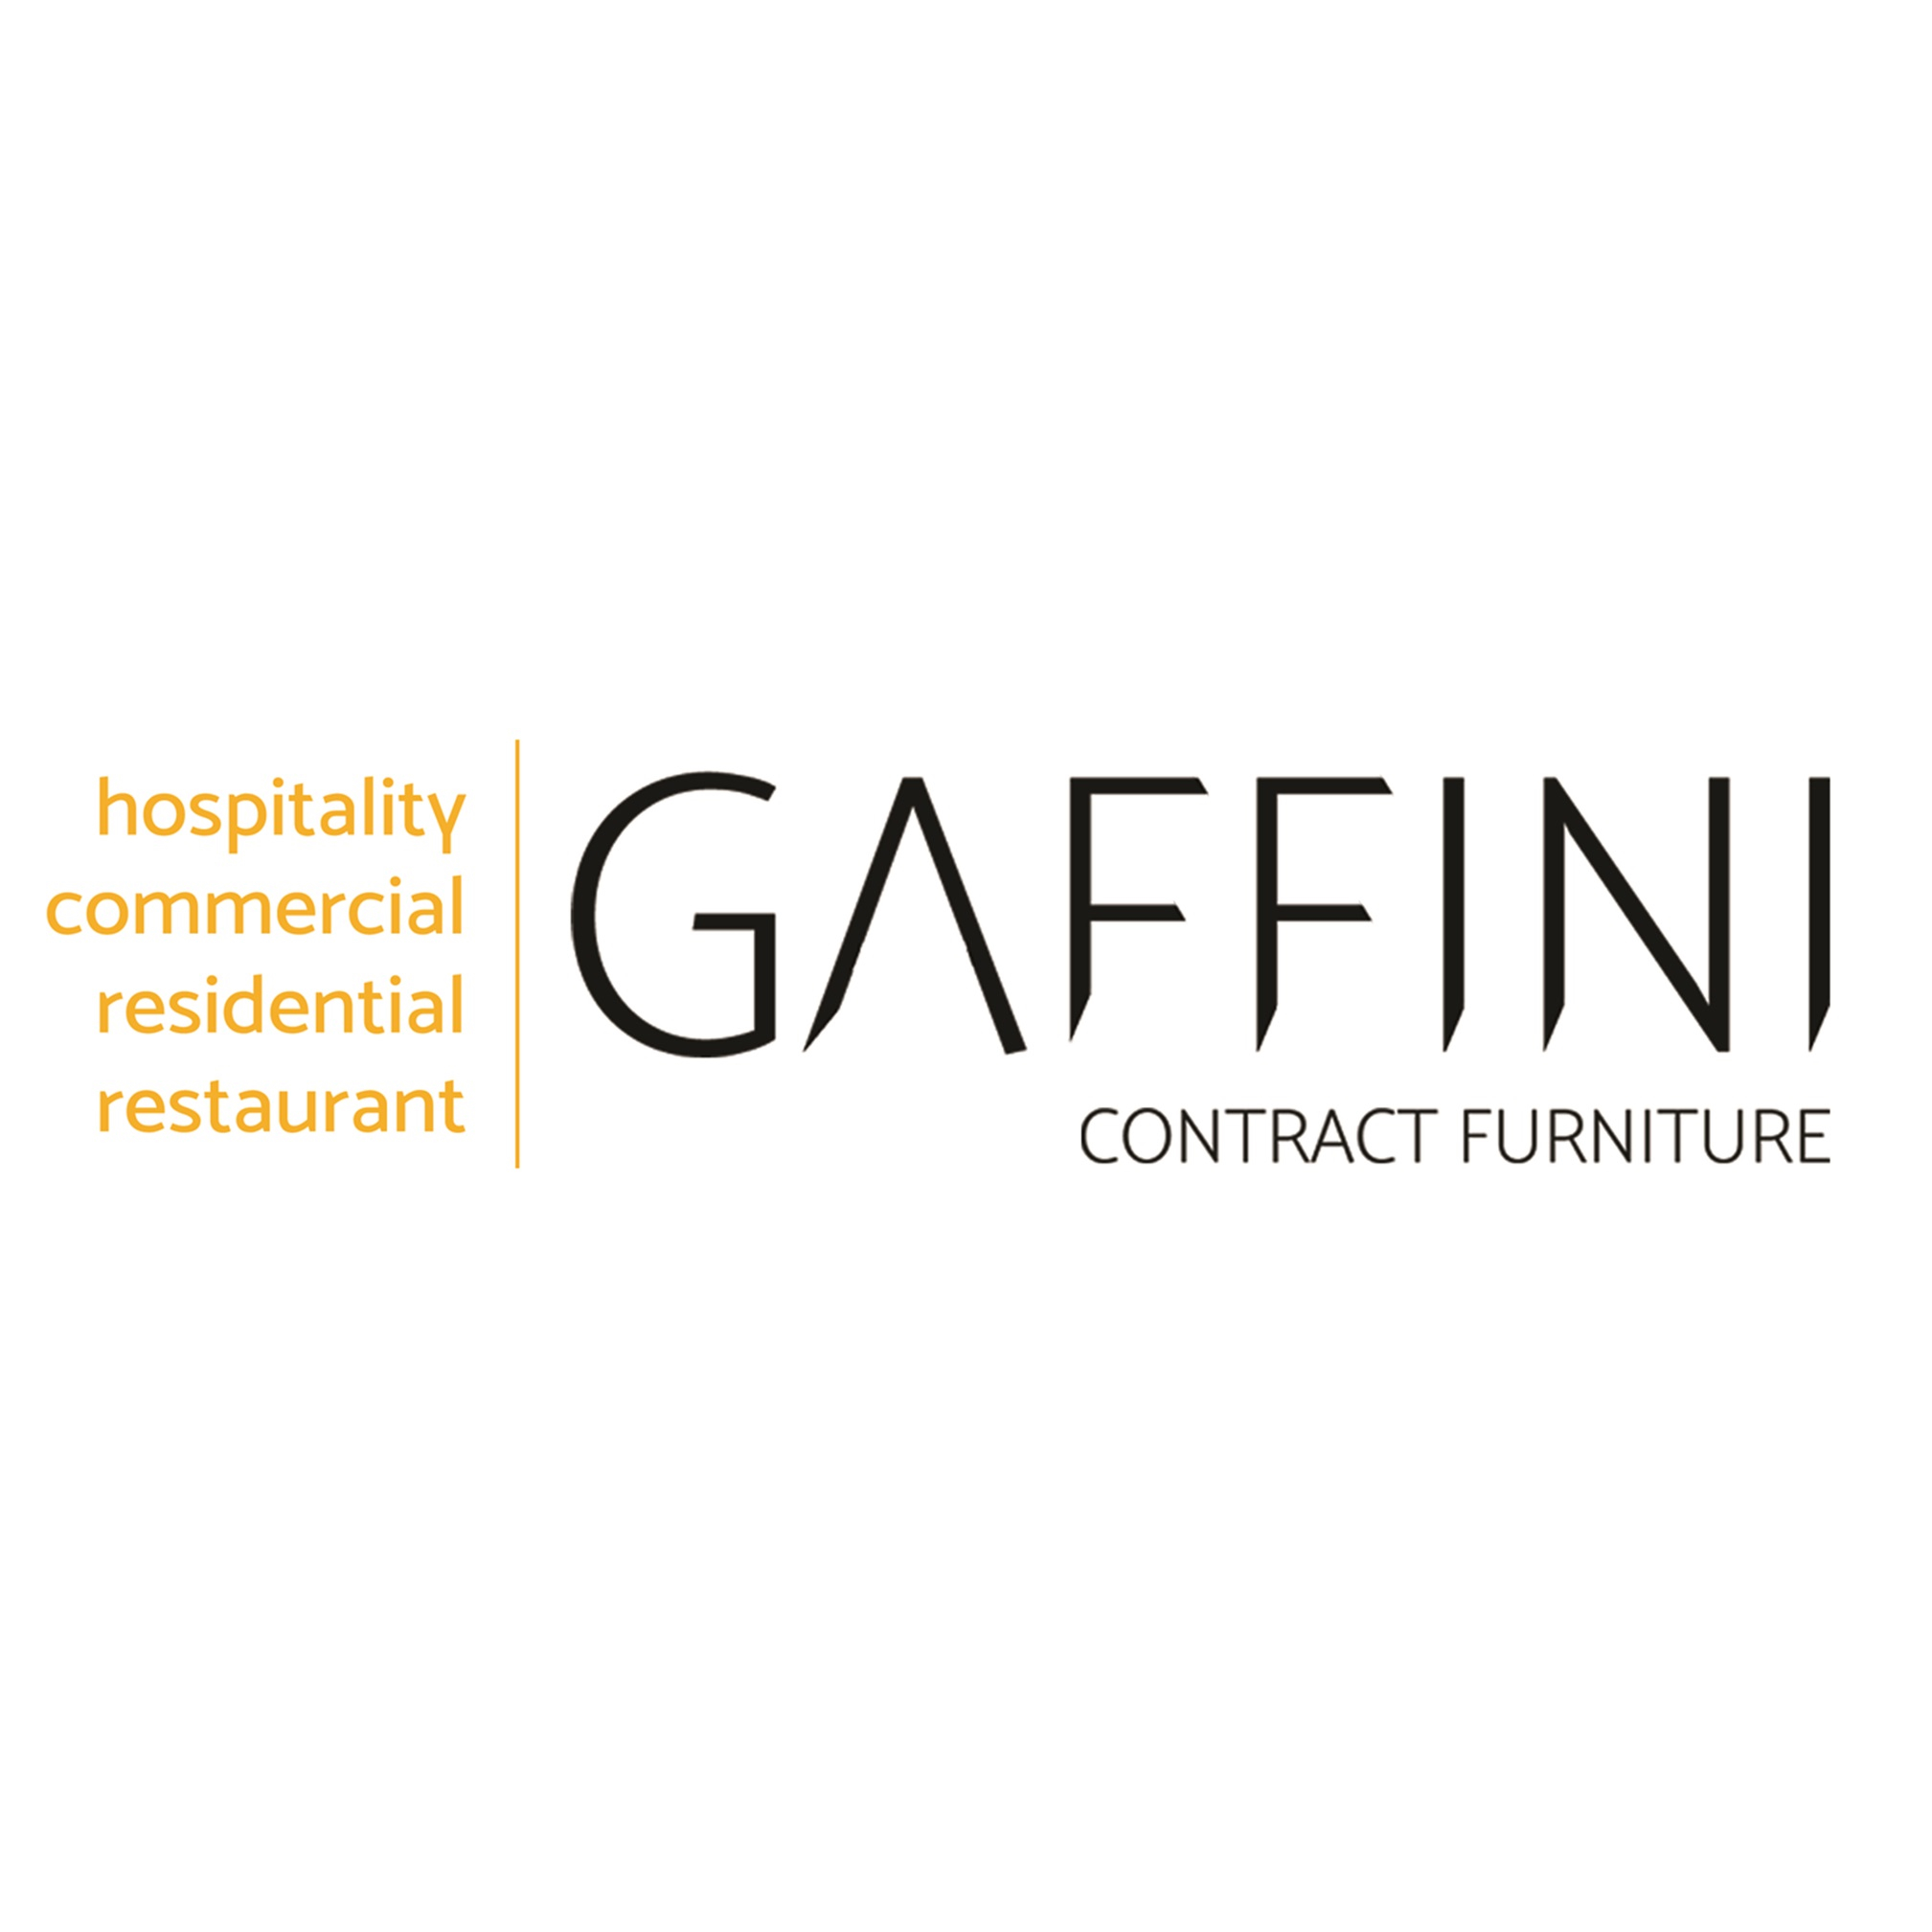 GAFFINI CONTRACT FURNITURE